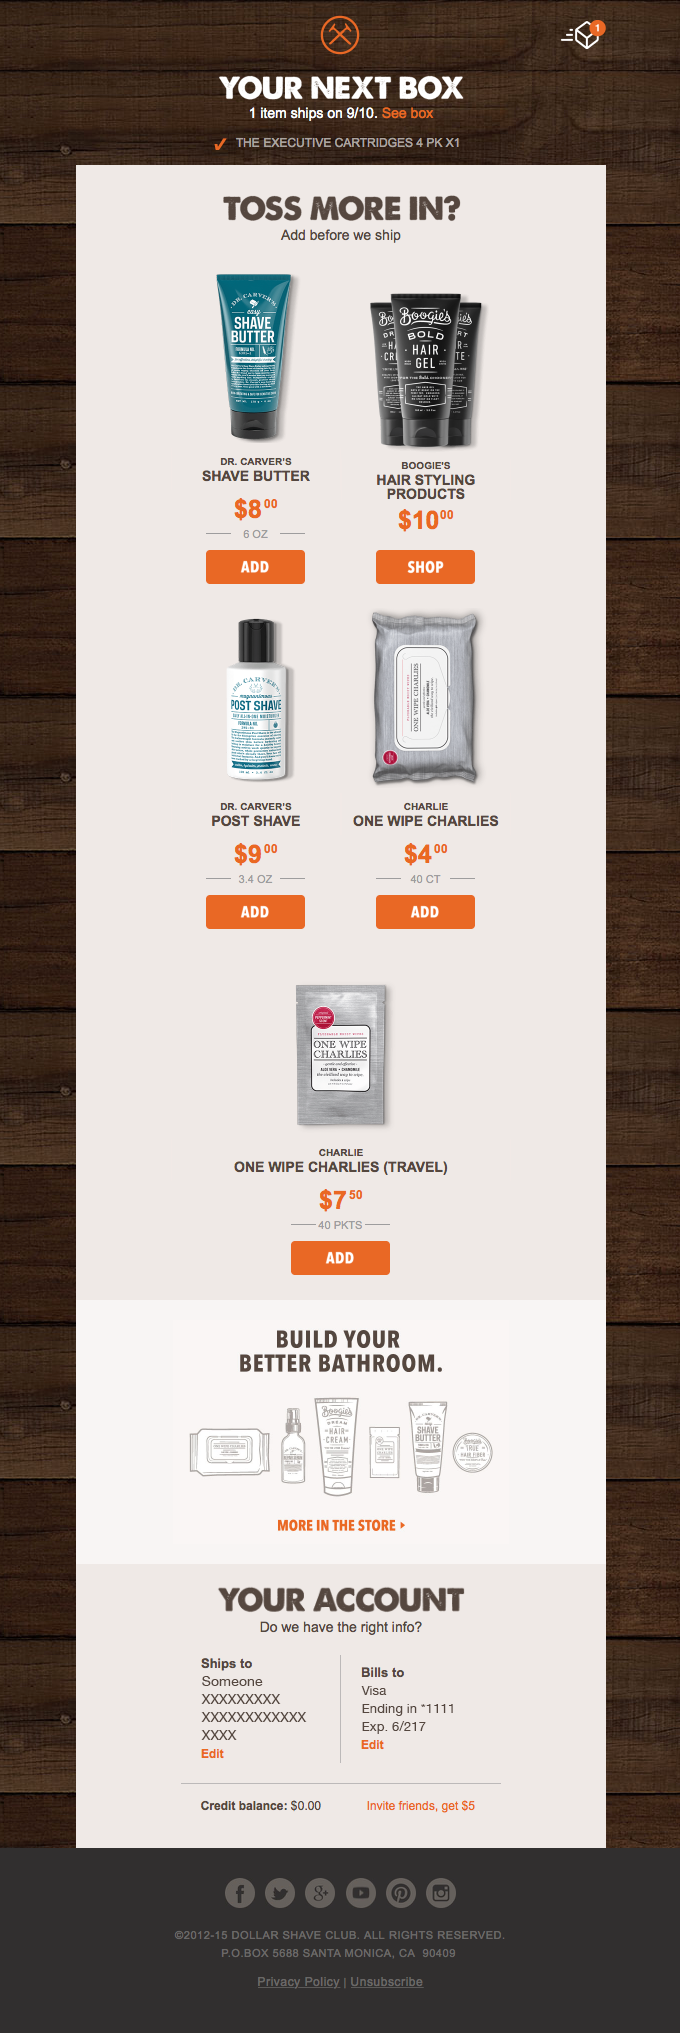 Cross-selling email automated by Dollar Shave Club